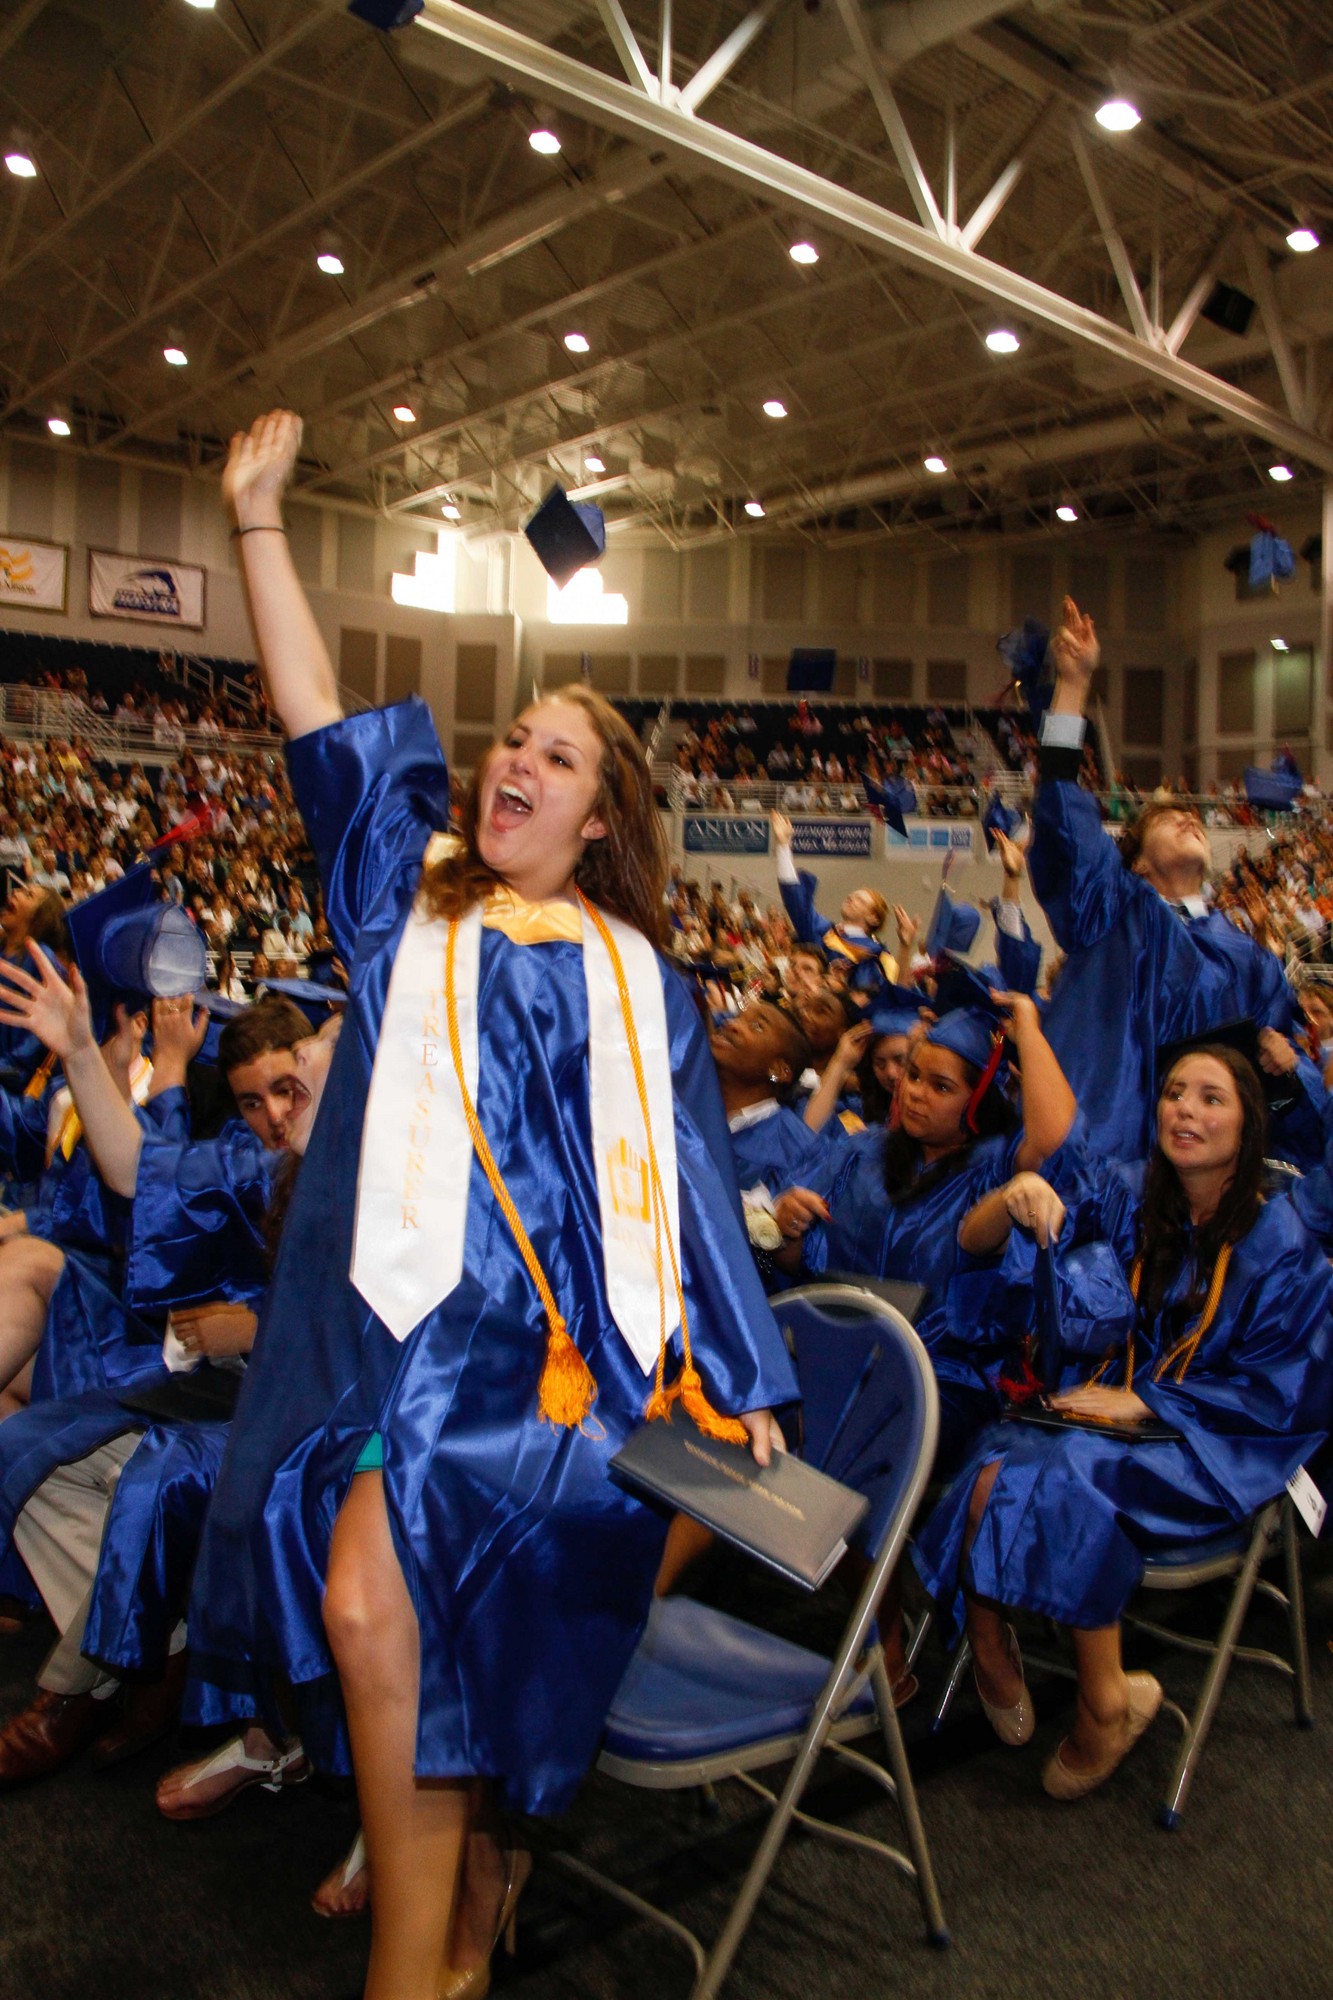 Jennifer Gentile jumped for joy as the class graduated.